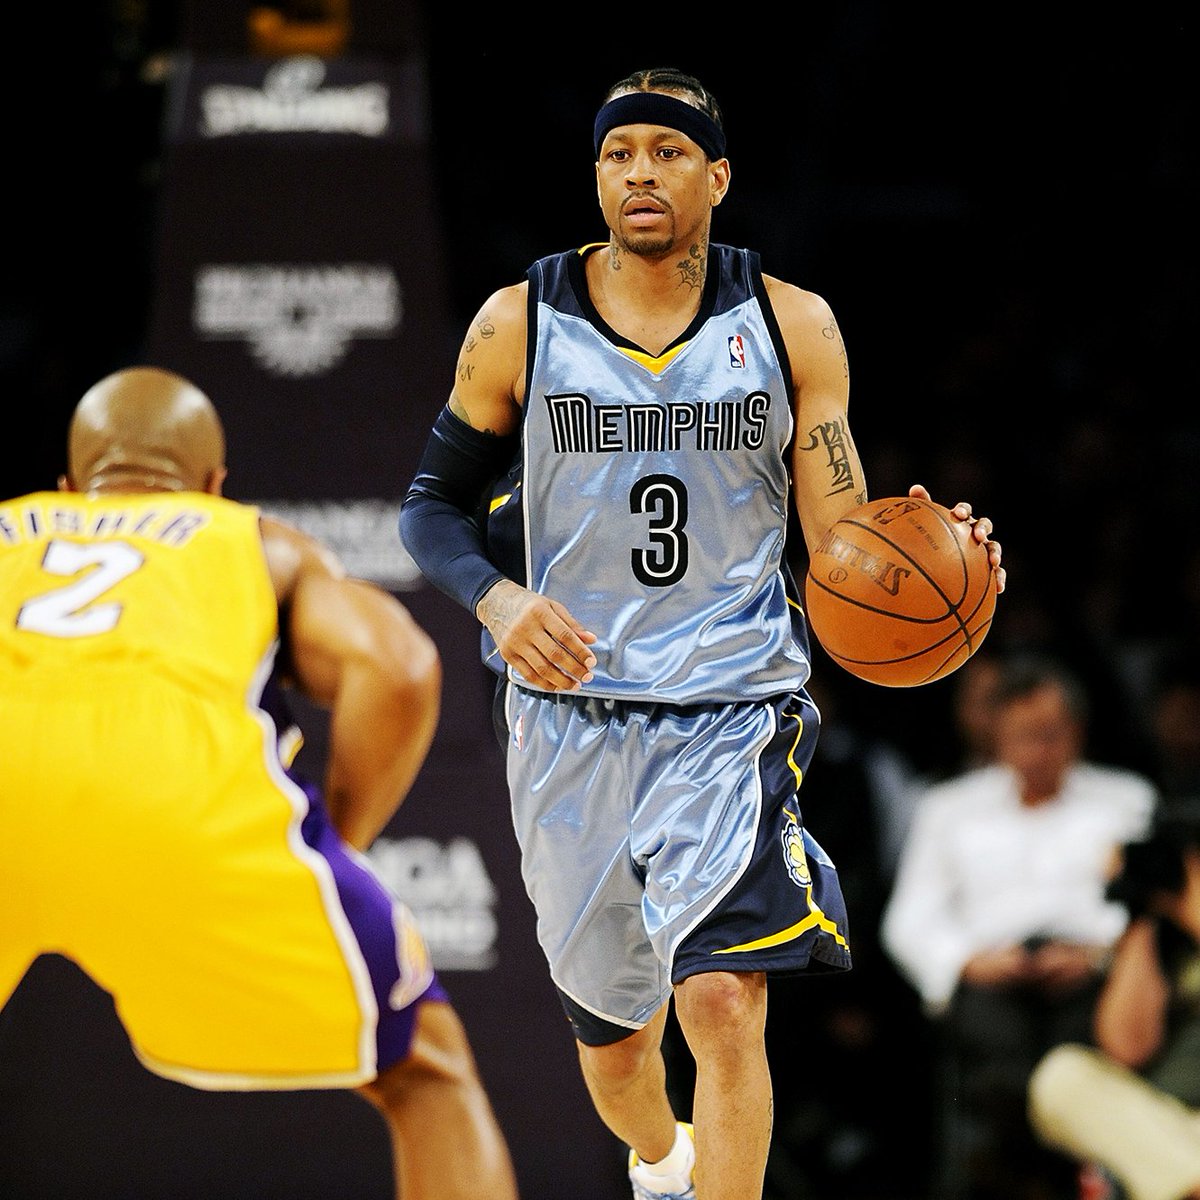 I seem to remember Allen Iverson playing more than three games for the Memphis Grizzlies. But apparently I'm mistaken.